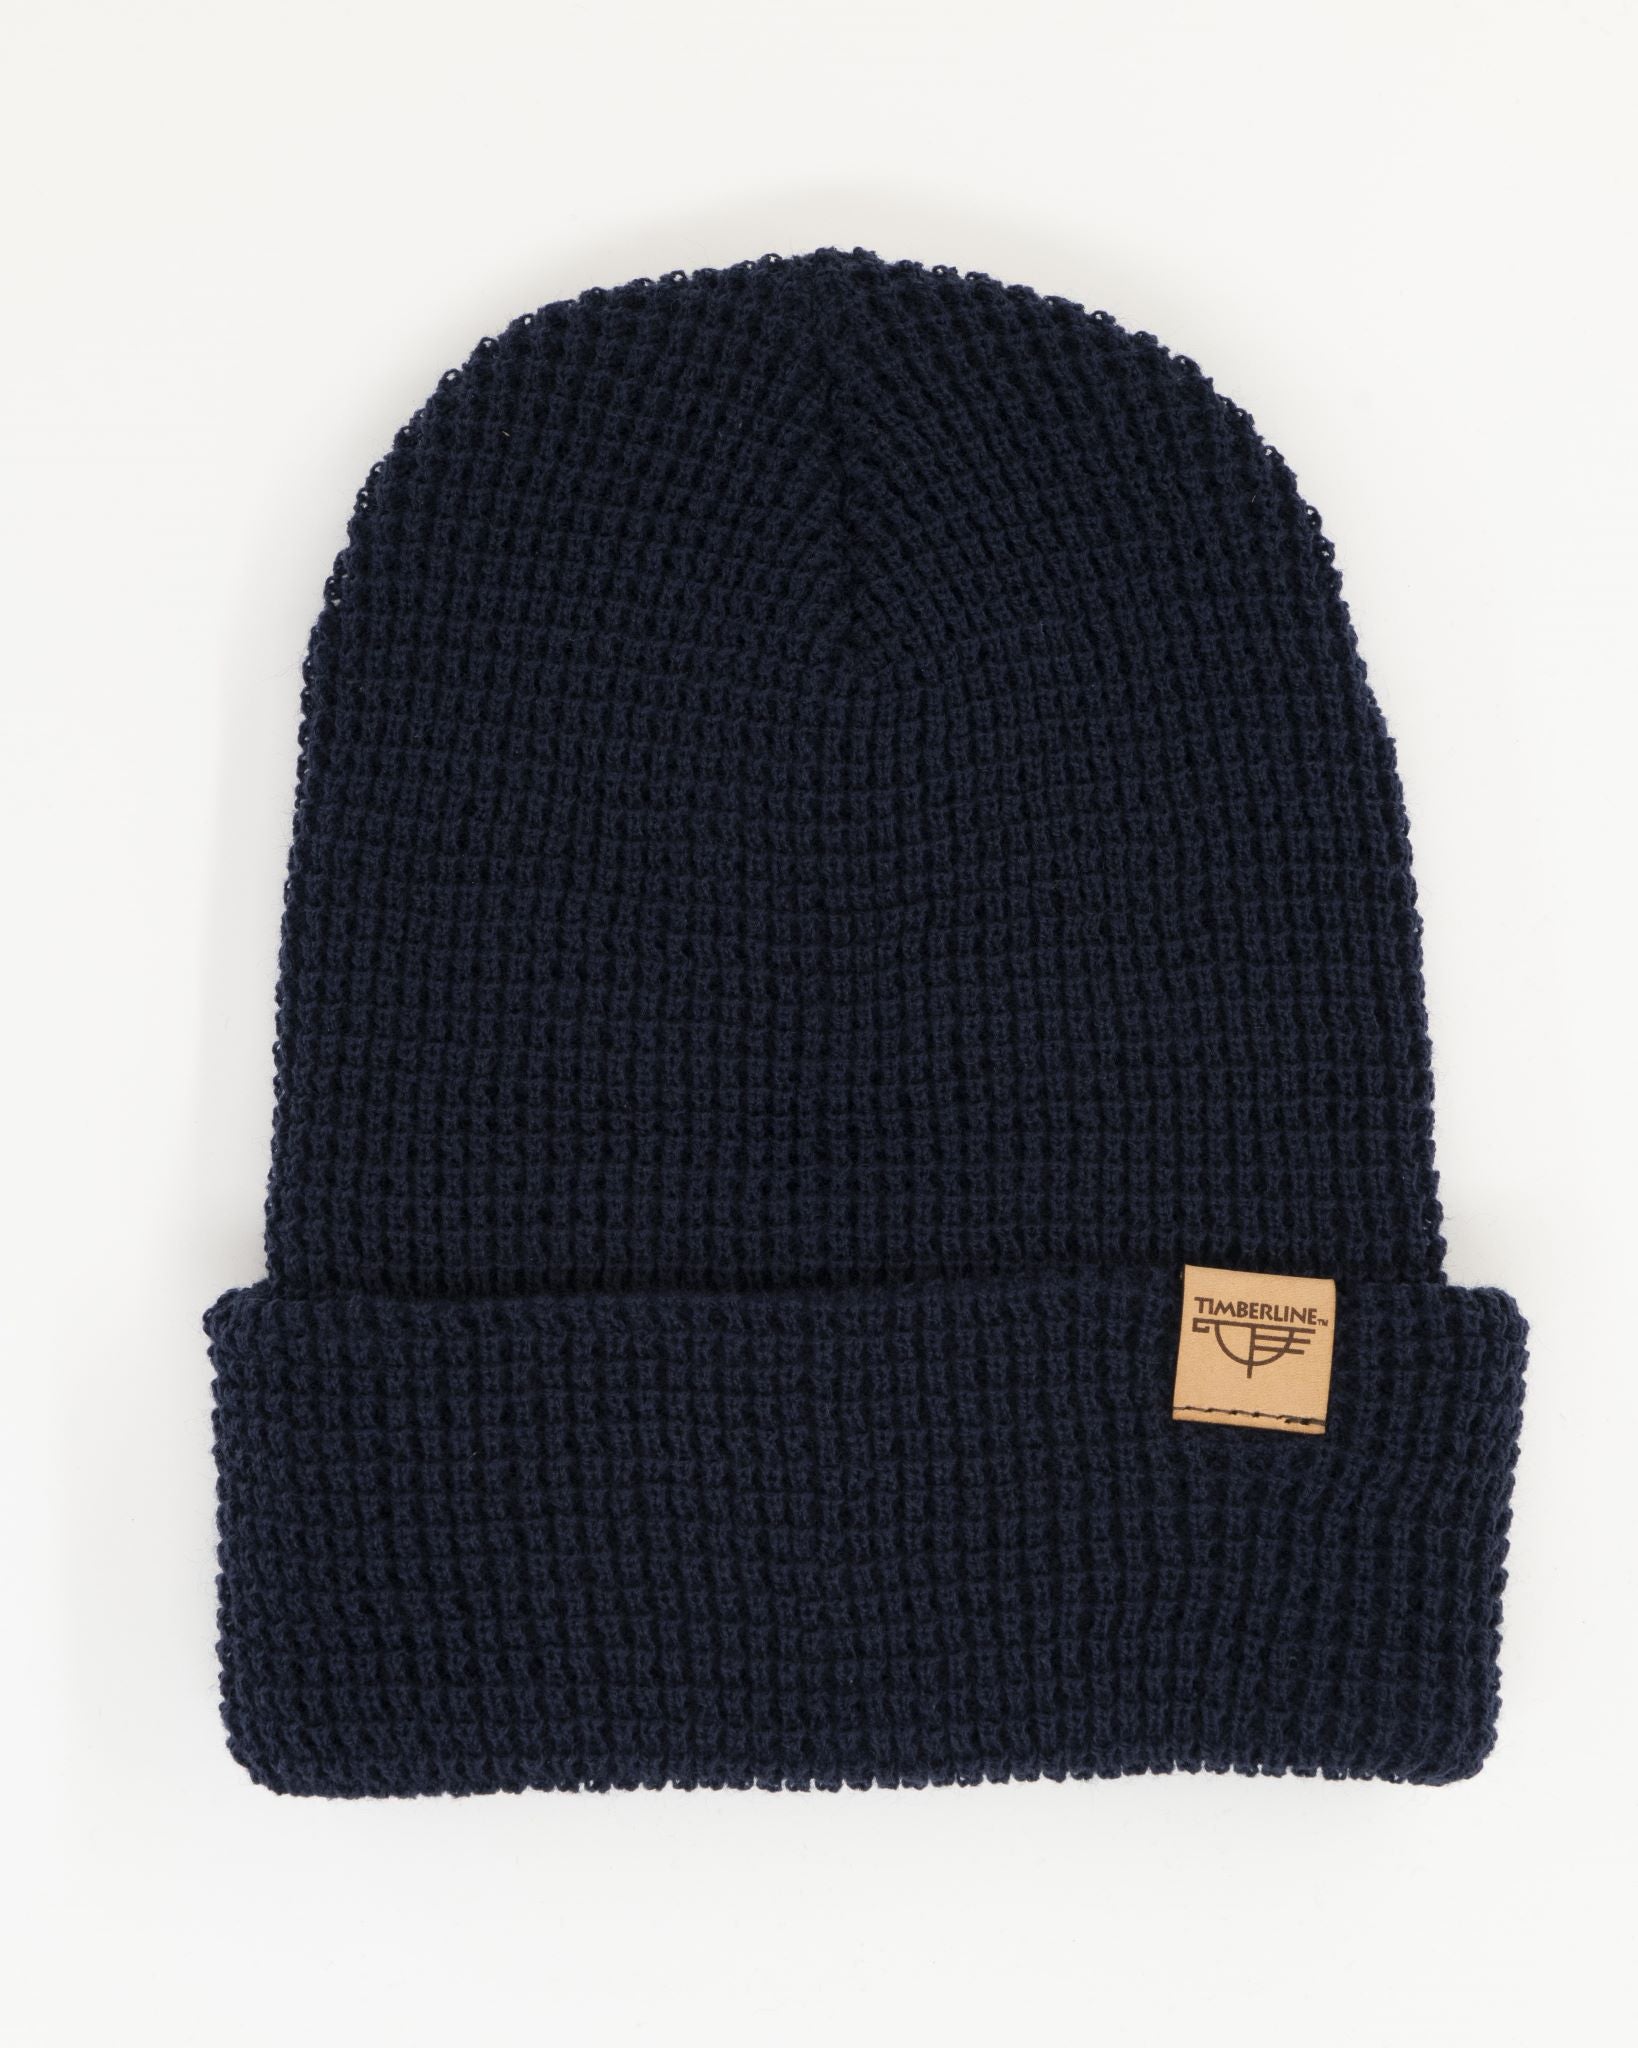 Beanie - Waffle Knit Leather Label - Available in Black, Yellow, and Navy